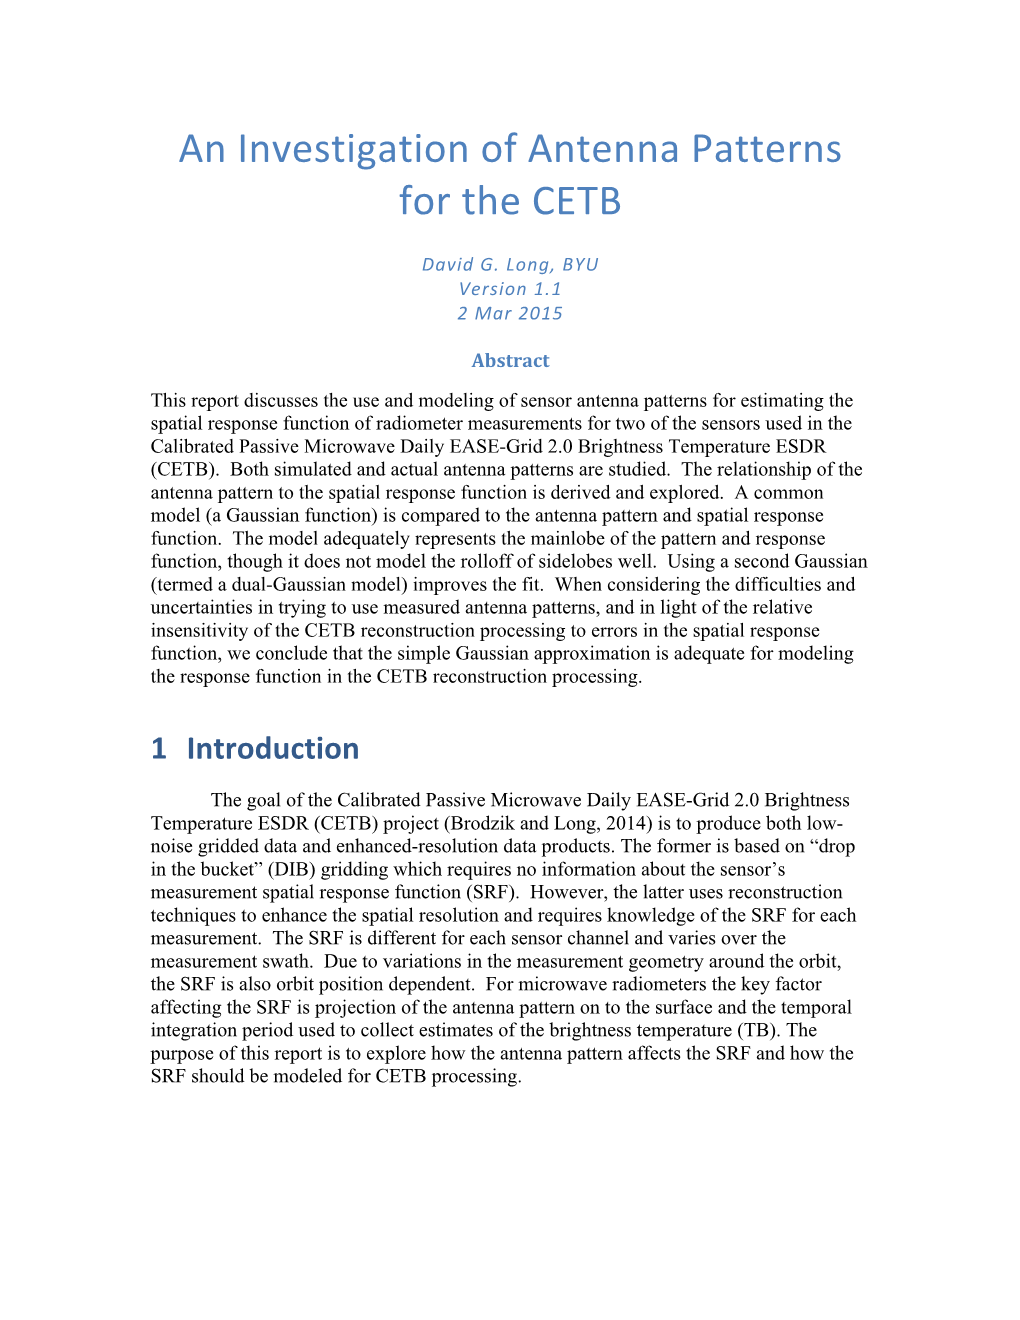 An Investigation of Antenna Patterns for the CETB